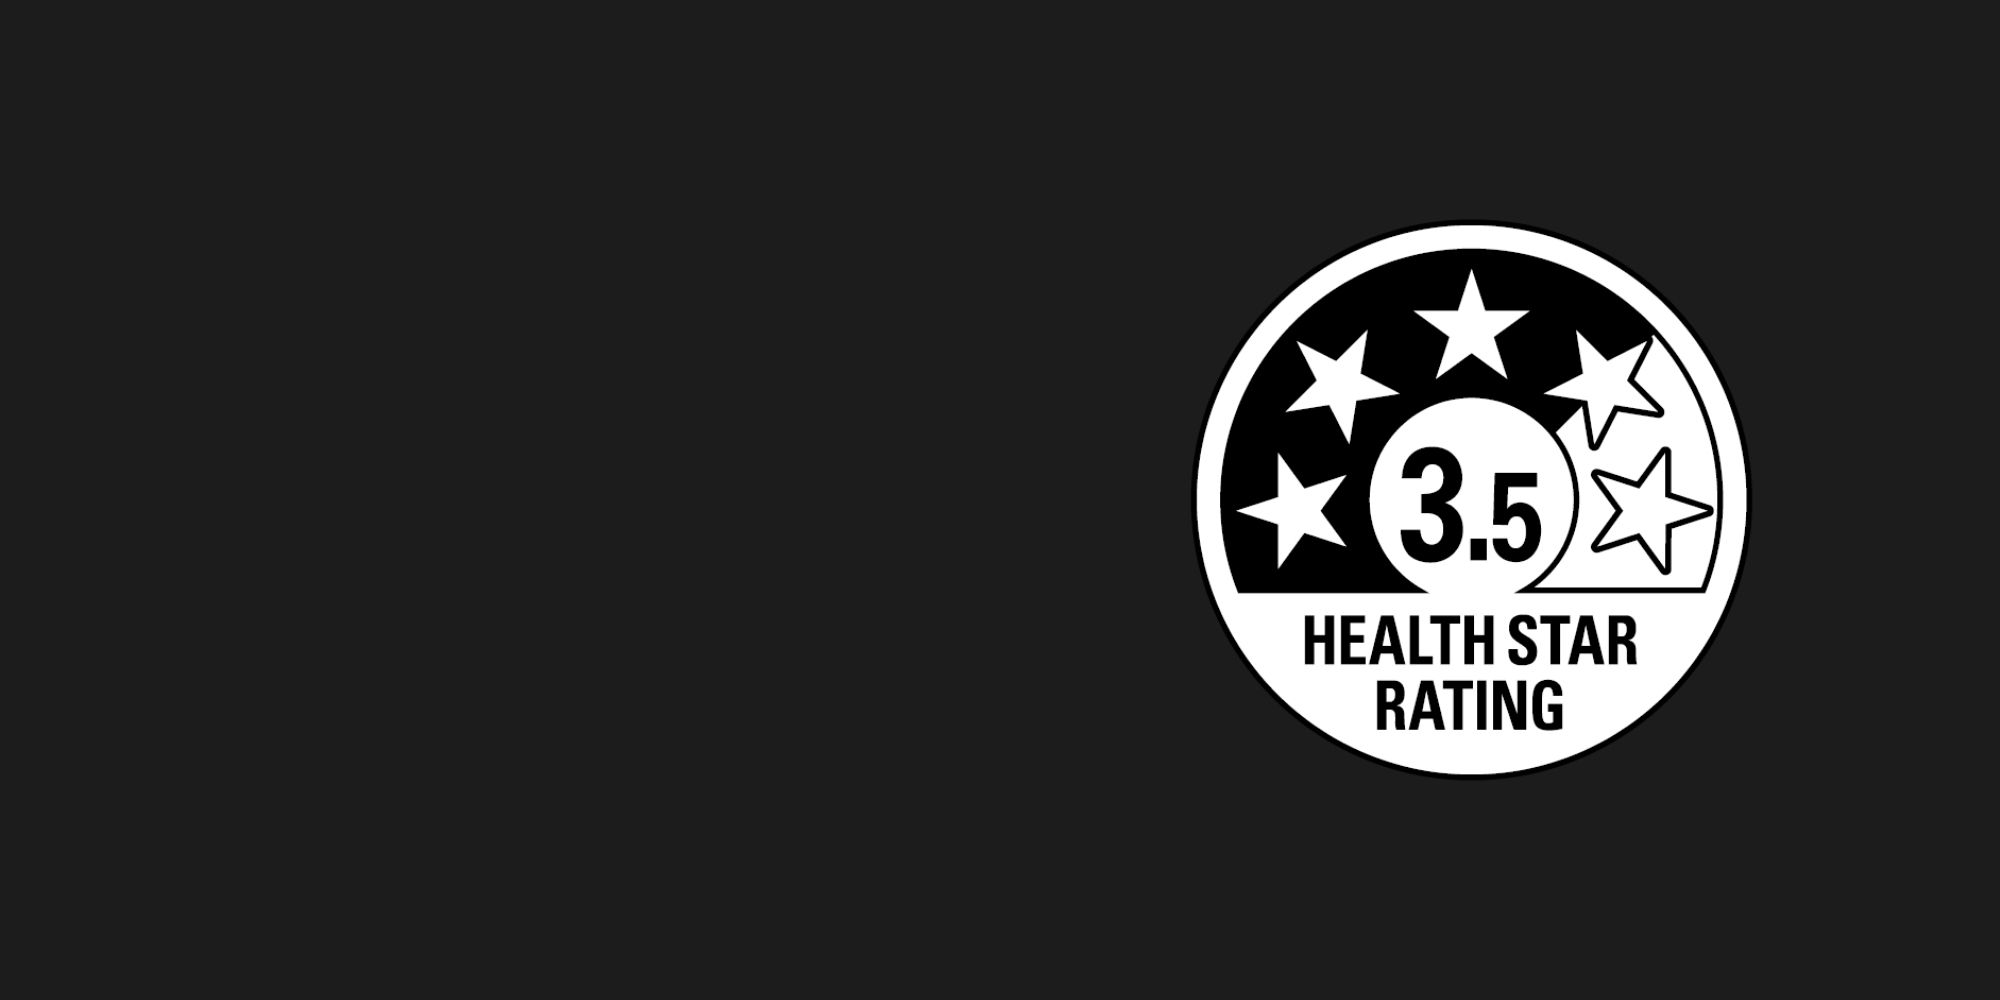 Heads up on the new Health Star Rating System